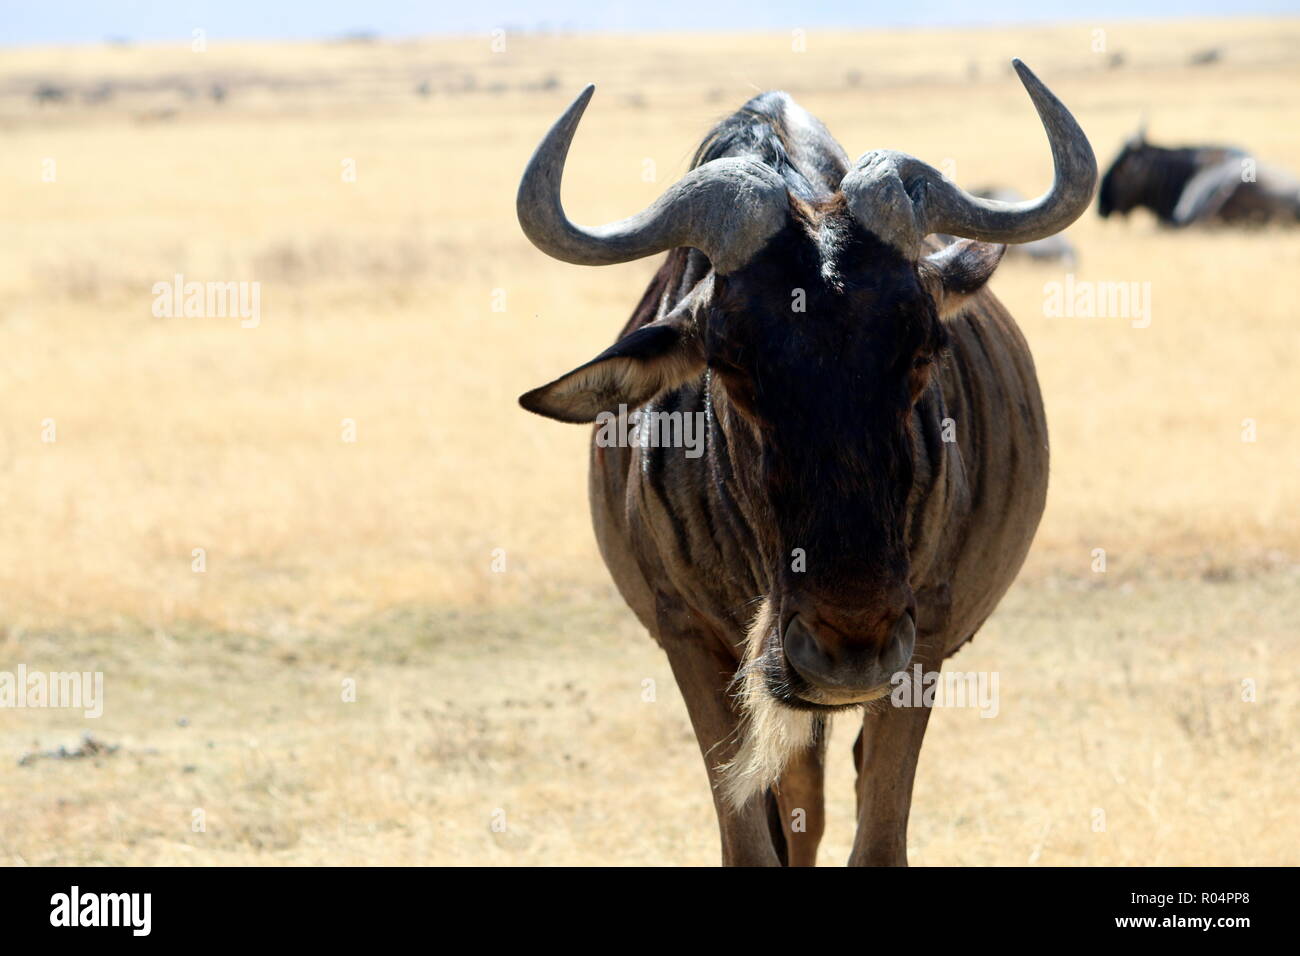 A wildebeest stares into the camera in Tanzania, daring the photographer to come closer Stock Photo